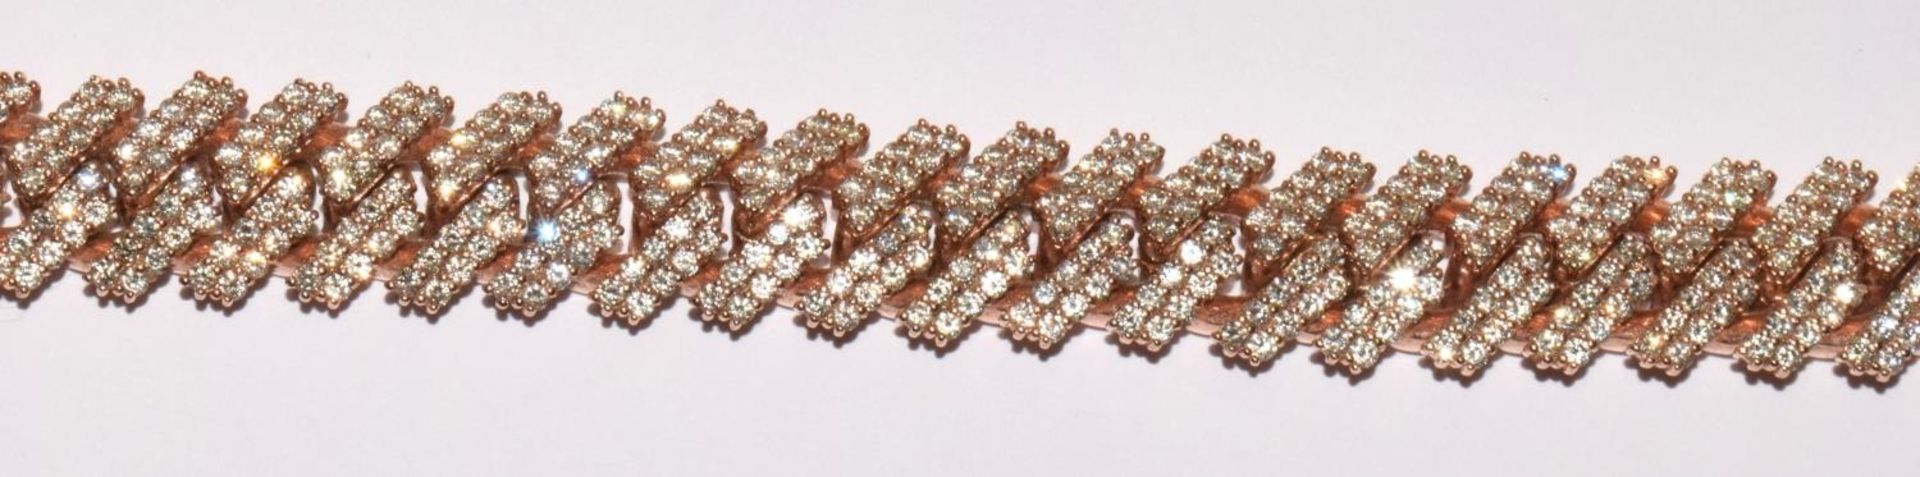 10ct rose gold Diamond encrusted bracelet set with approx 5ct diamonds in a herring bone pattern - Image 4 of 9